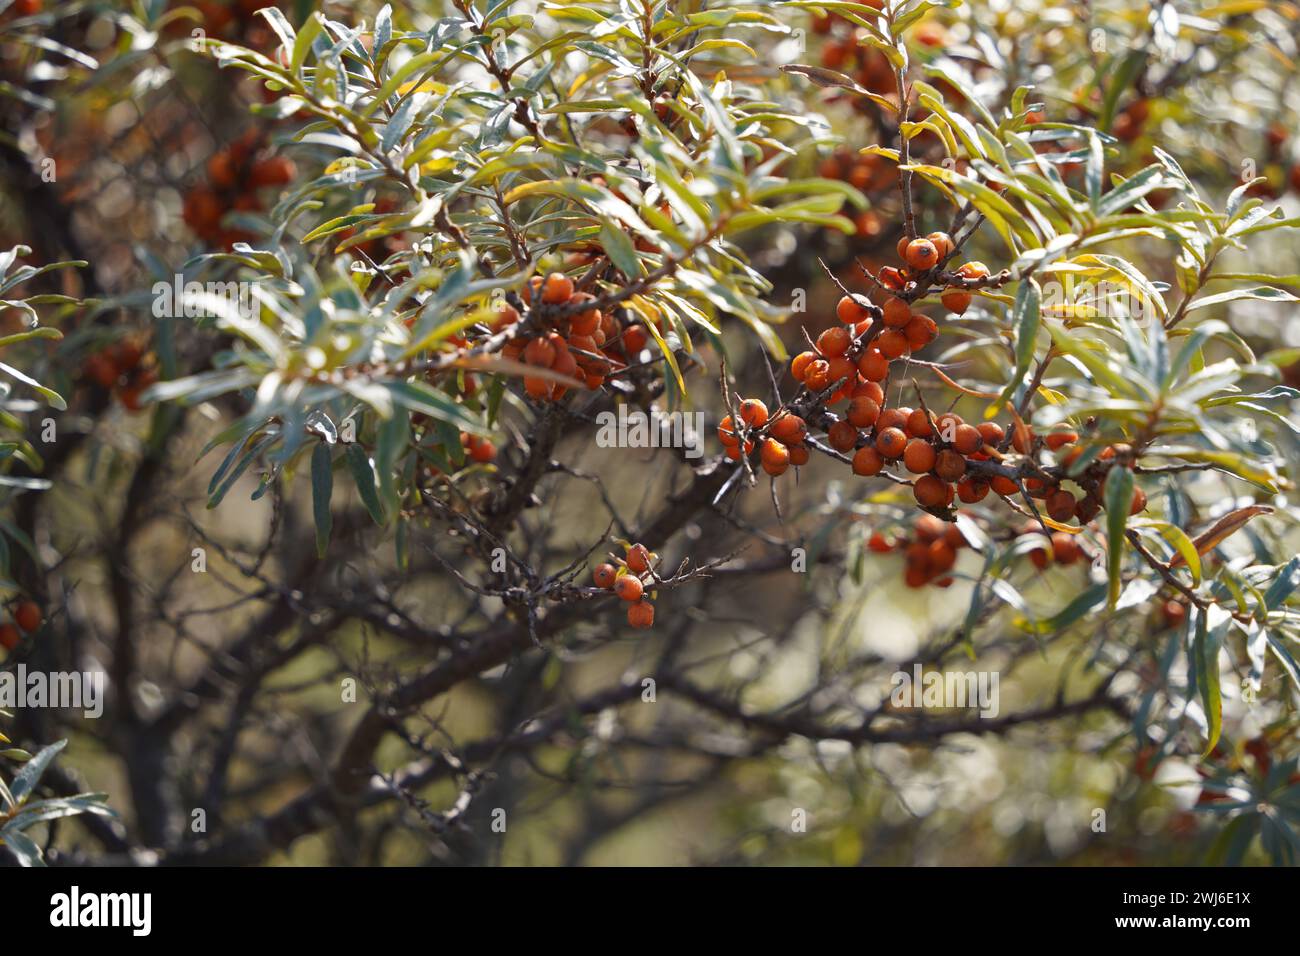 Branches of seabuckthorn with fruits Stock Photo